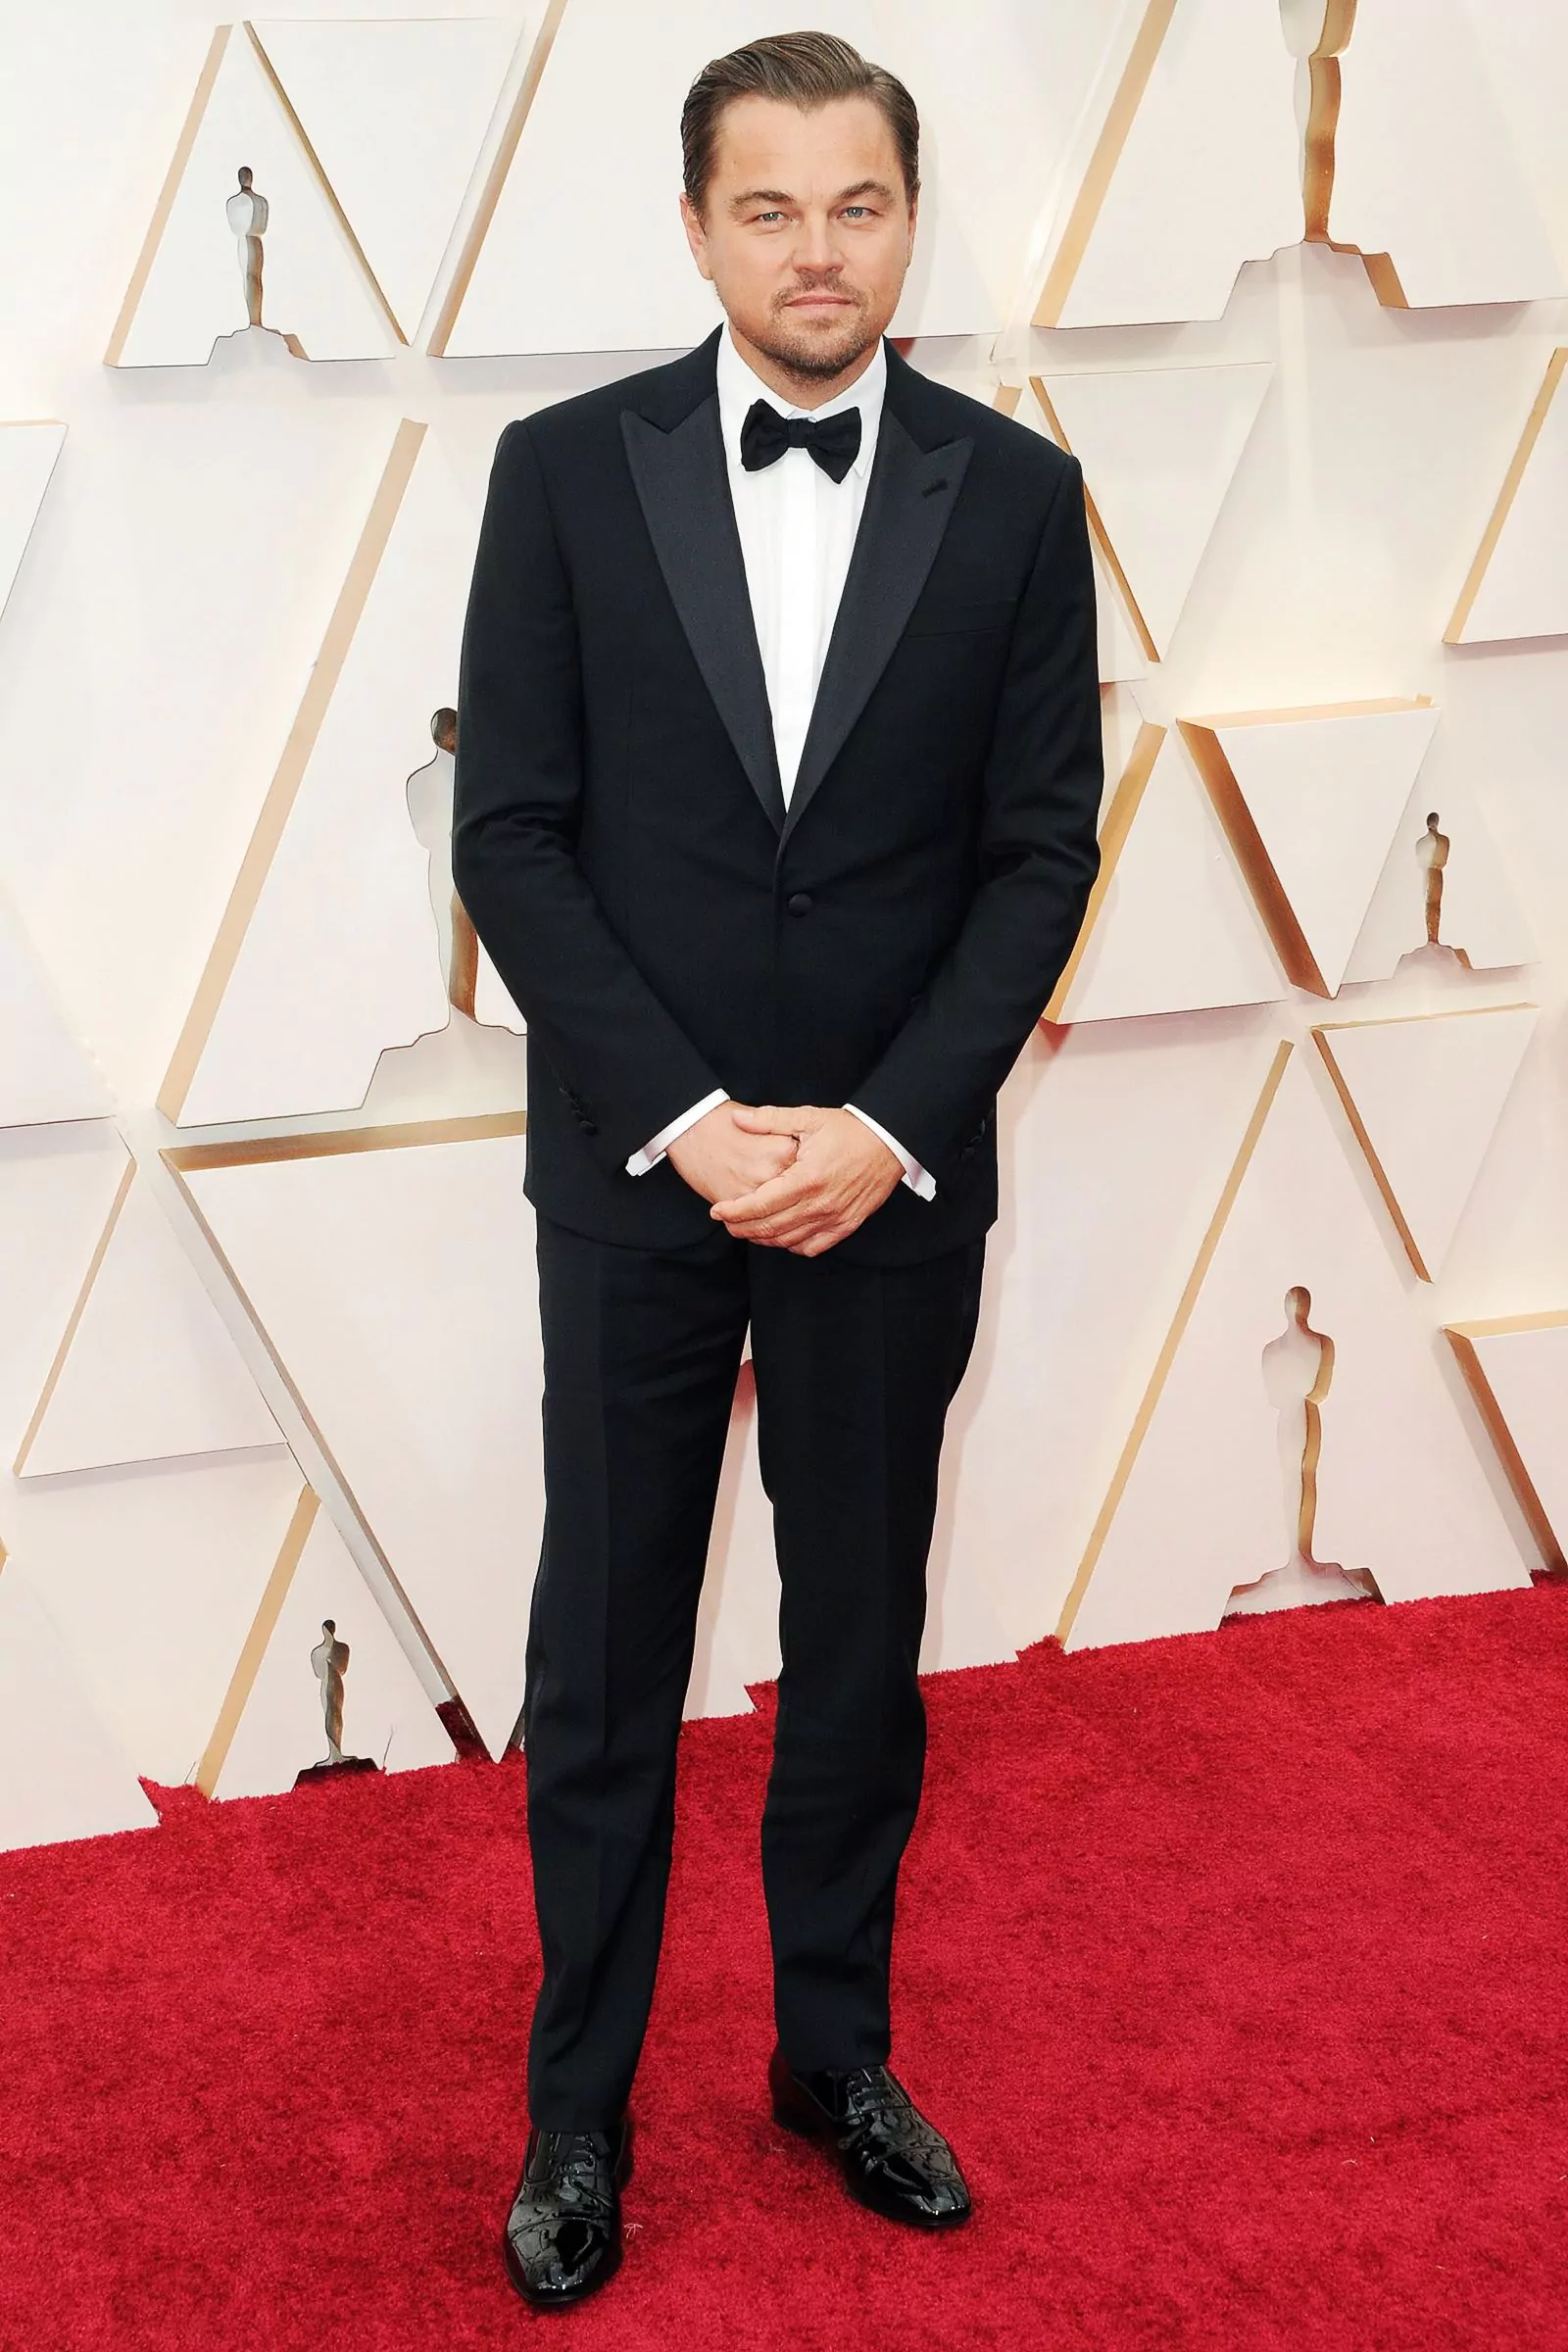 Leonardo DiCaprio at the 92nd Academy Awards in Los Angeles on February 9, 2020.